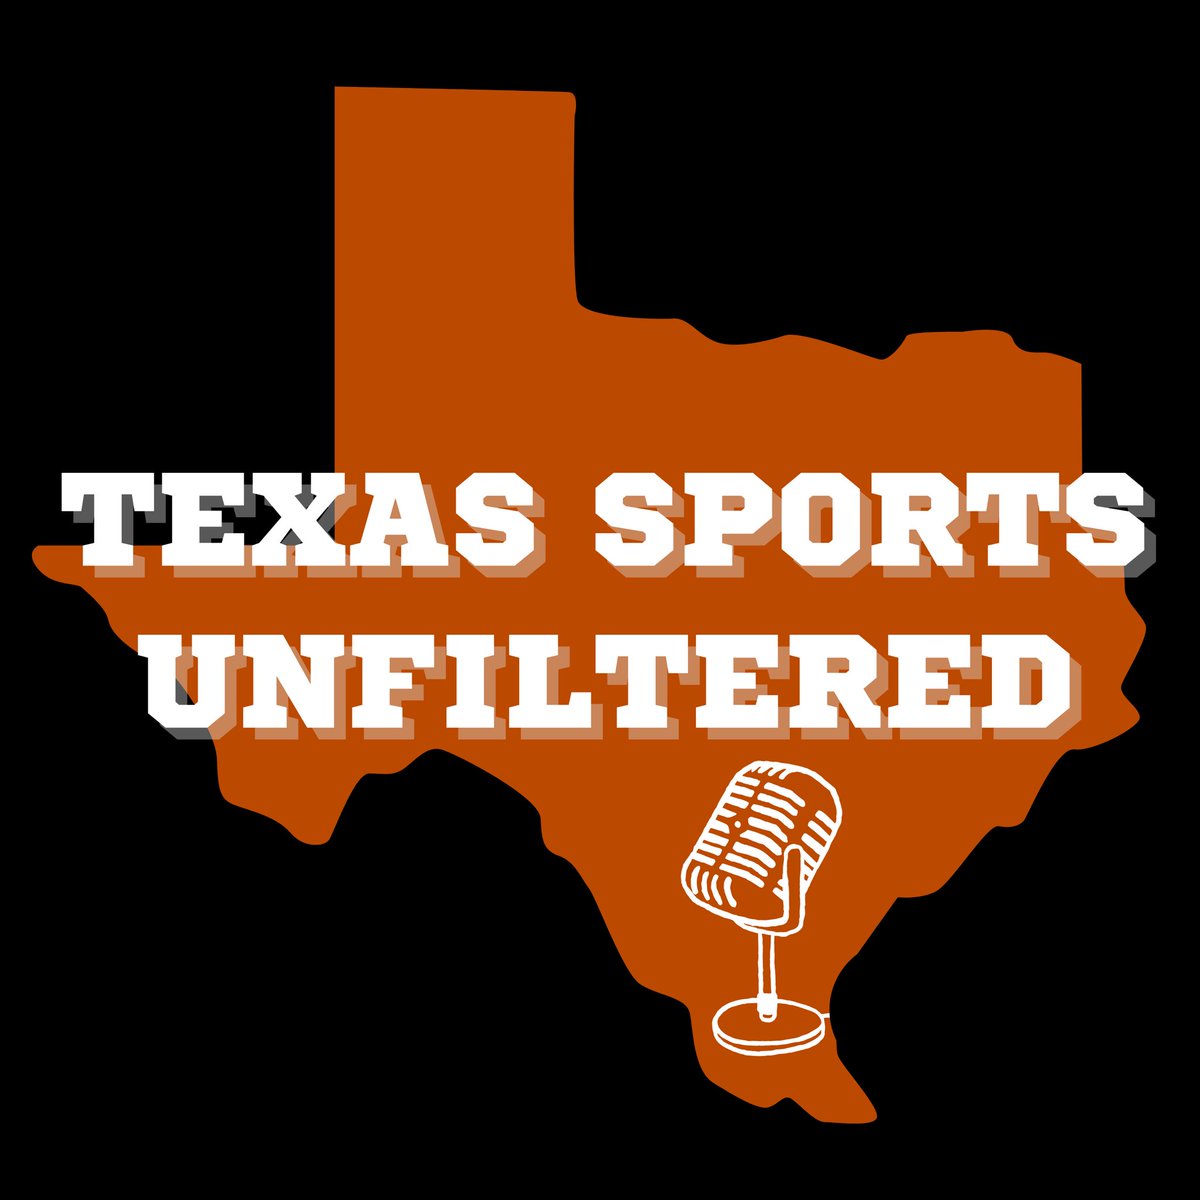 We’ve got some BIG announcements coming your way over the next couple of weeks… The first one happens TOMORROW MORNING at 9:30 during “Bucky & BK!” Don’t miss it. Tune in on the Texas Sports Unfiltered app or on YouTube at the link below! Youtube.com/@texassportsun…